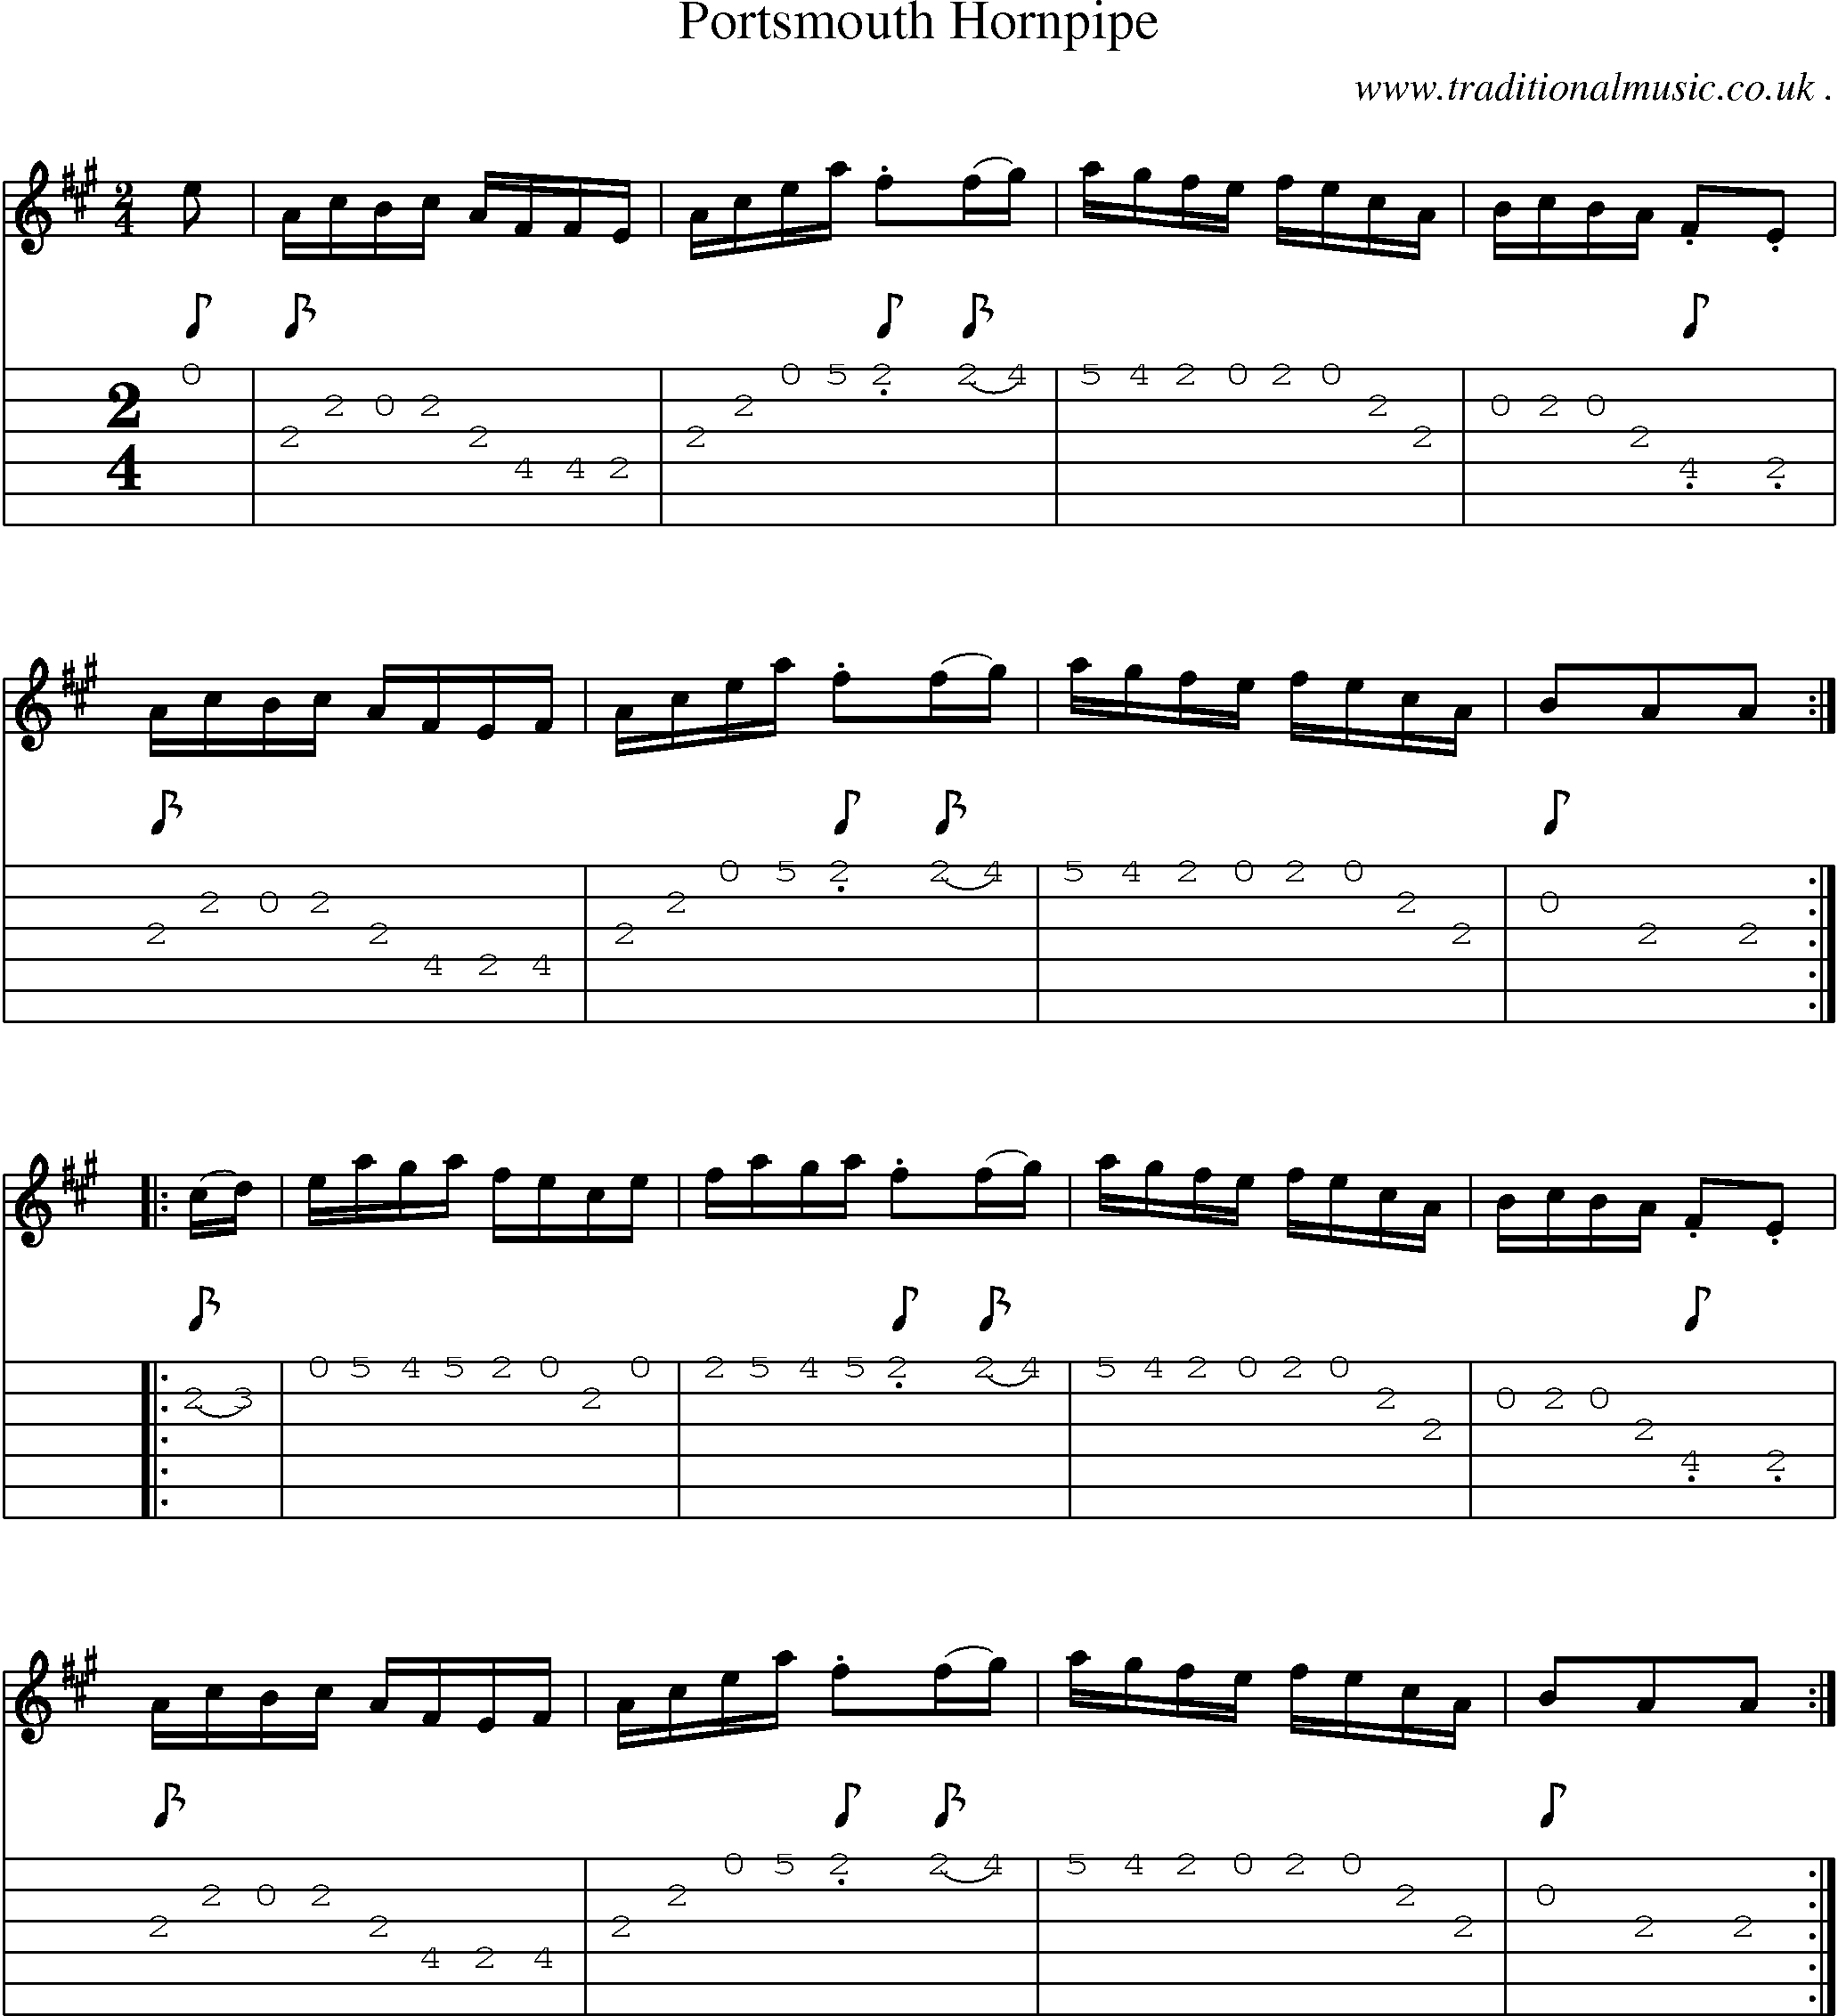 Sheet-Music and Guitar Tabs for Portsmouth Hornpipe